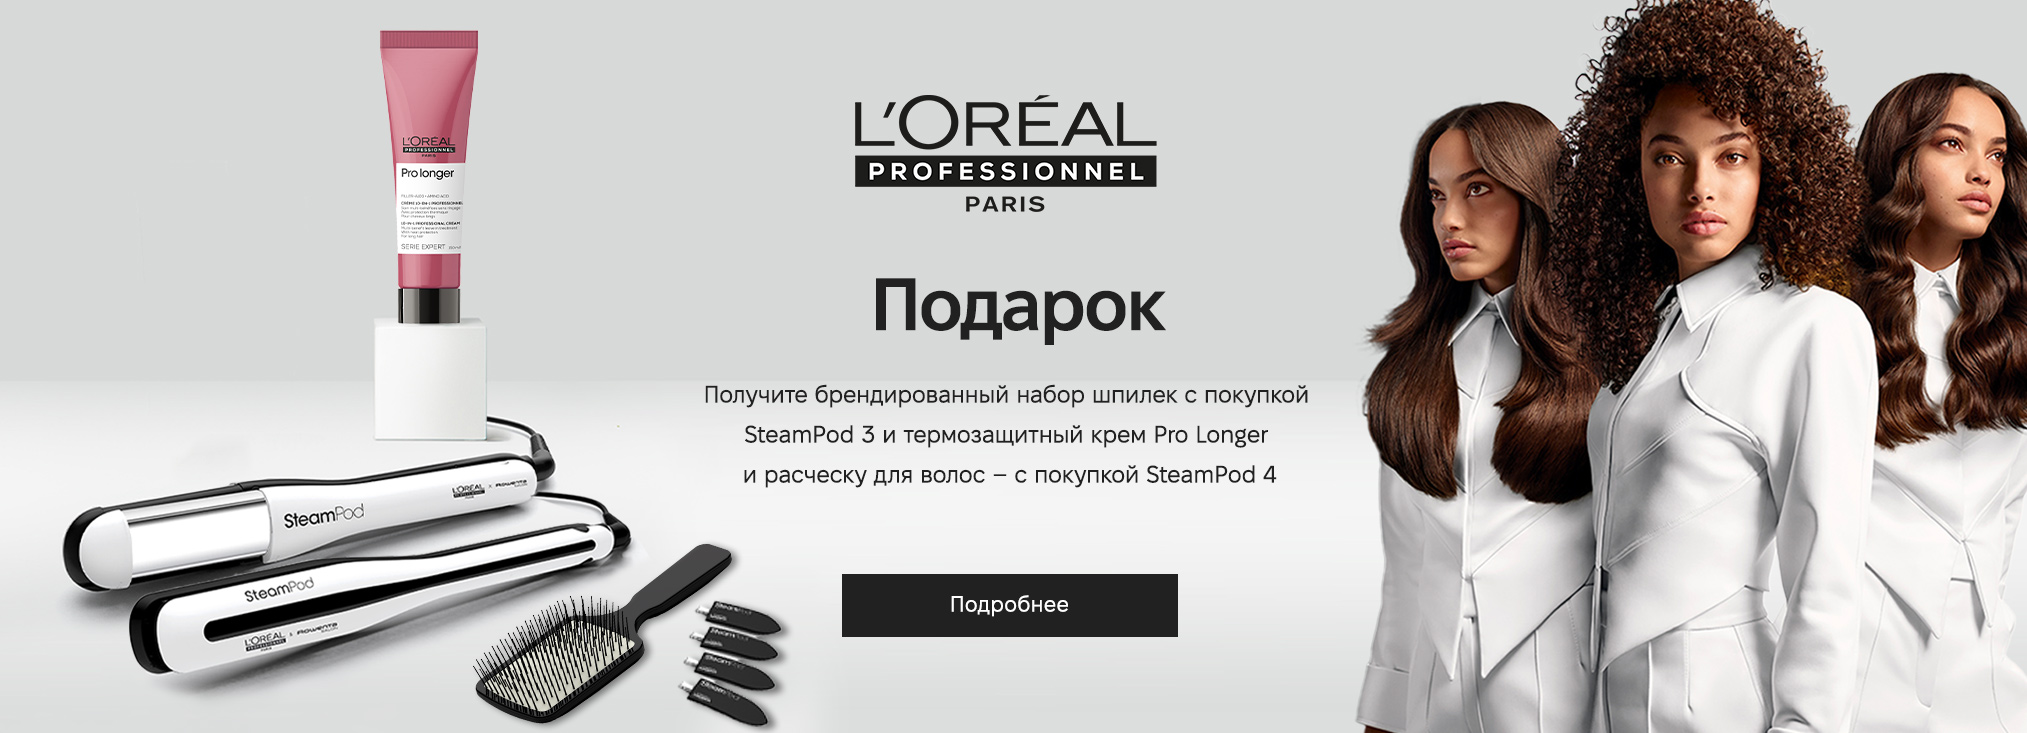 L'Oreal Professionnel_actions